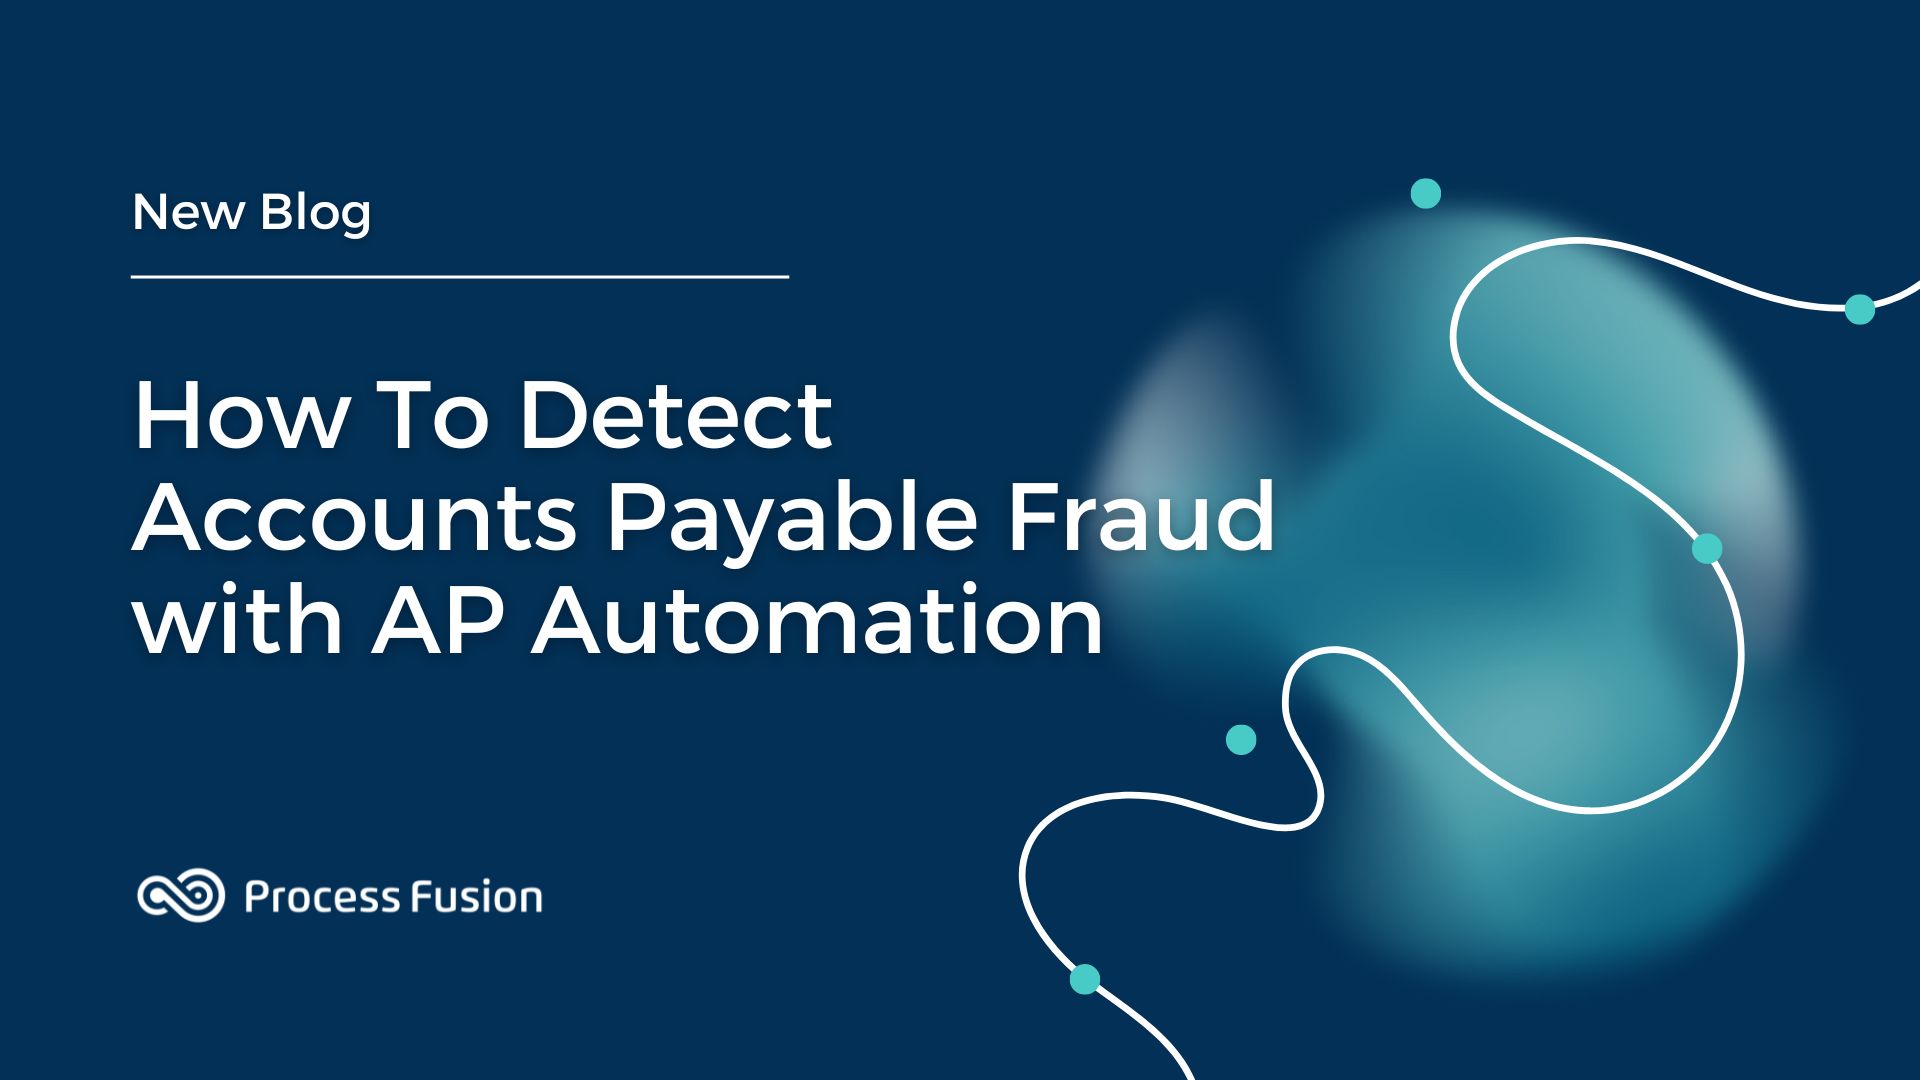 How To Detect Accounts Payable Fraud with AP Automation